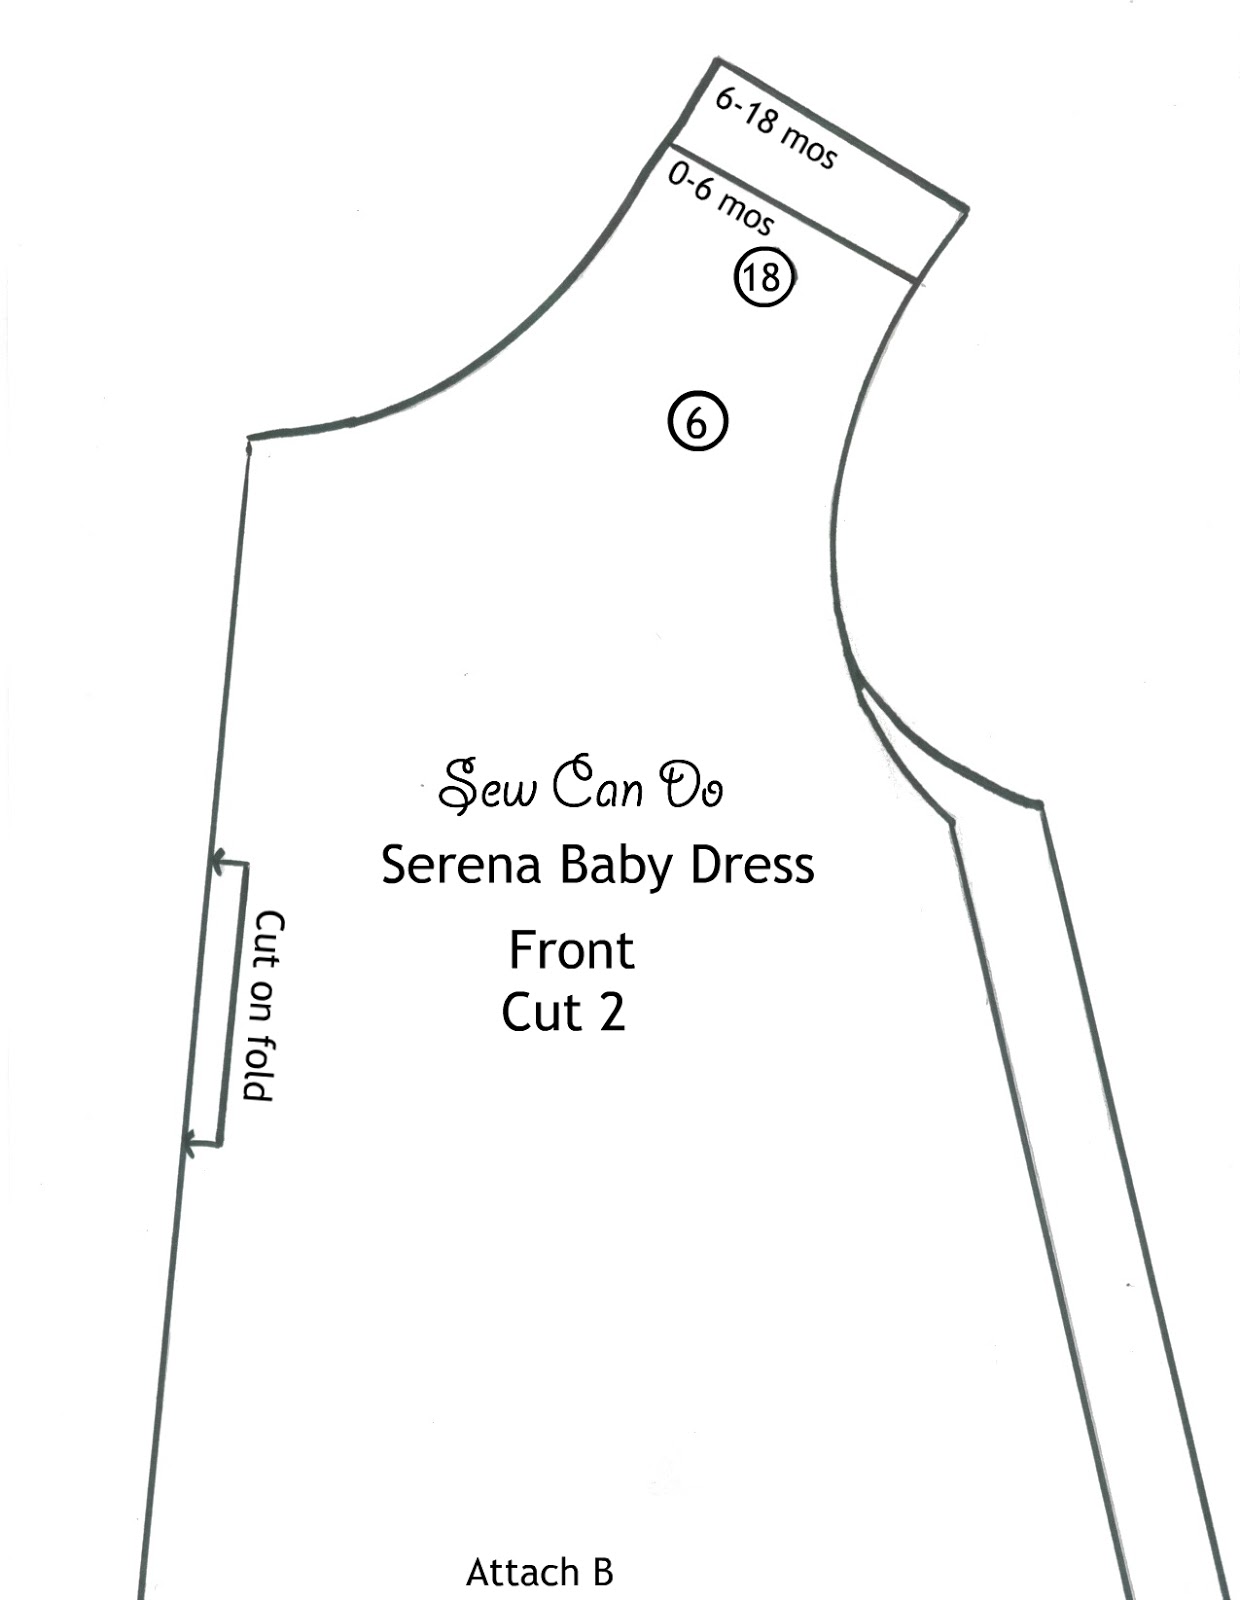 sew-can-do-back-to-sewing-free-serena-baby-dress-pattern